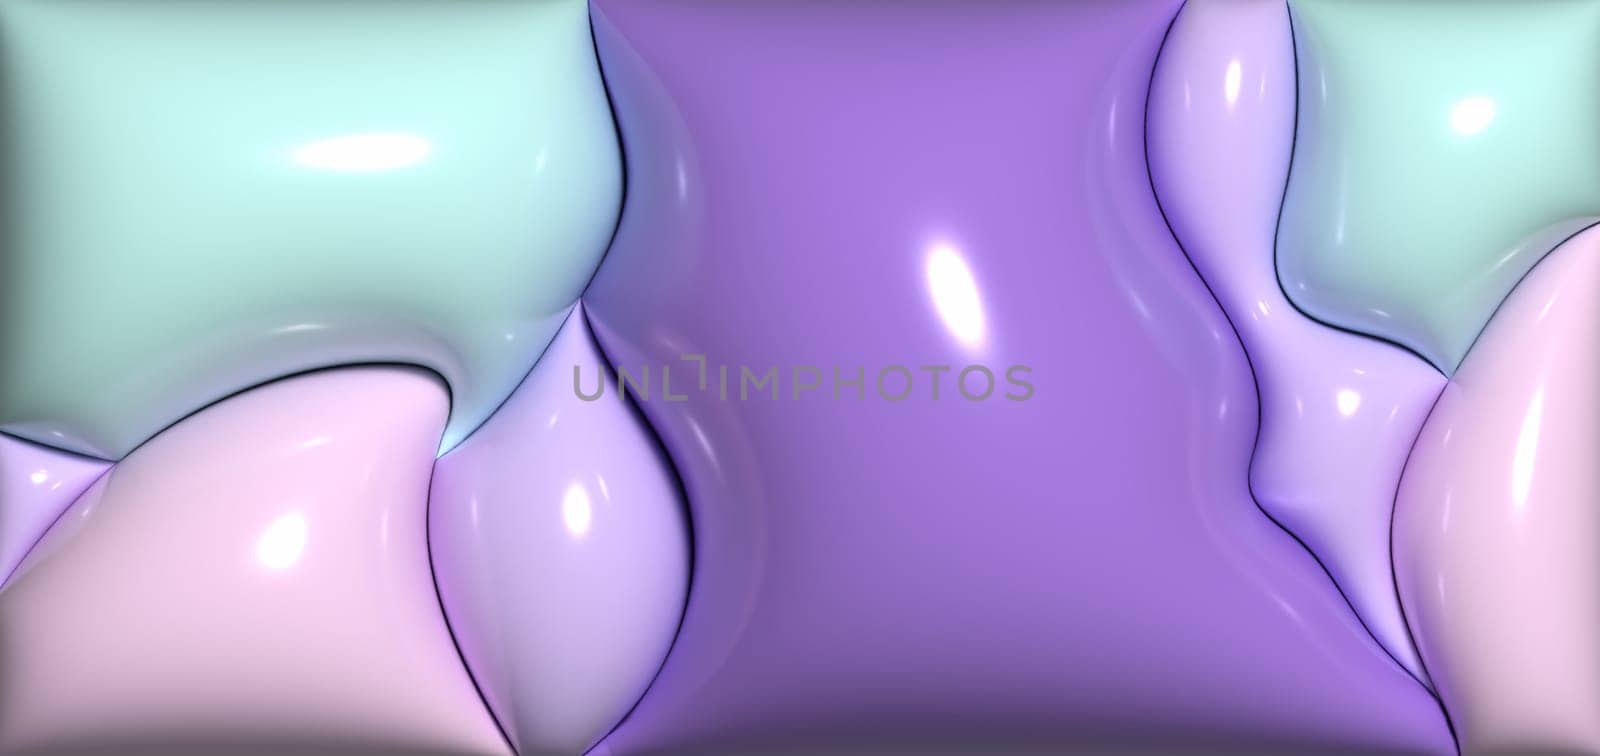 Abstract purple background with curved lines, 3D rendering illustration, inflated figures, banner